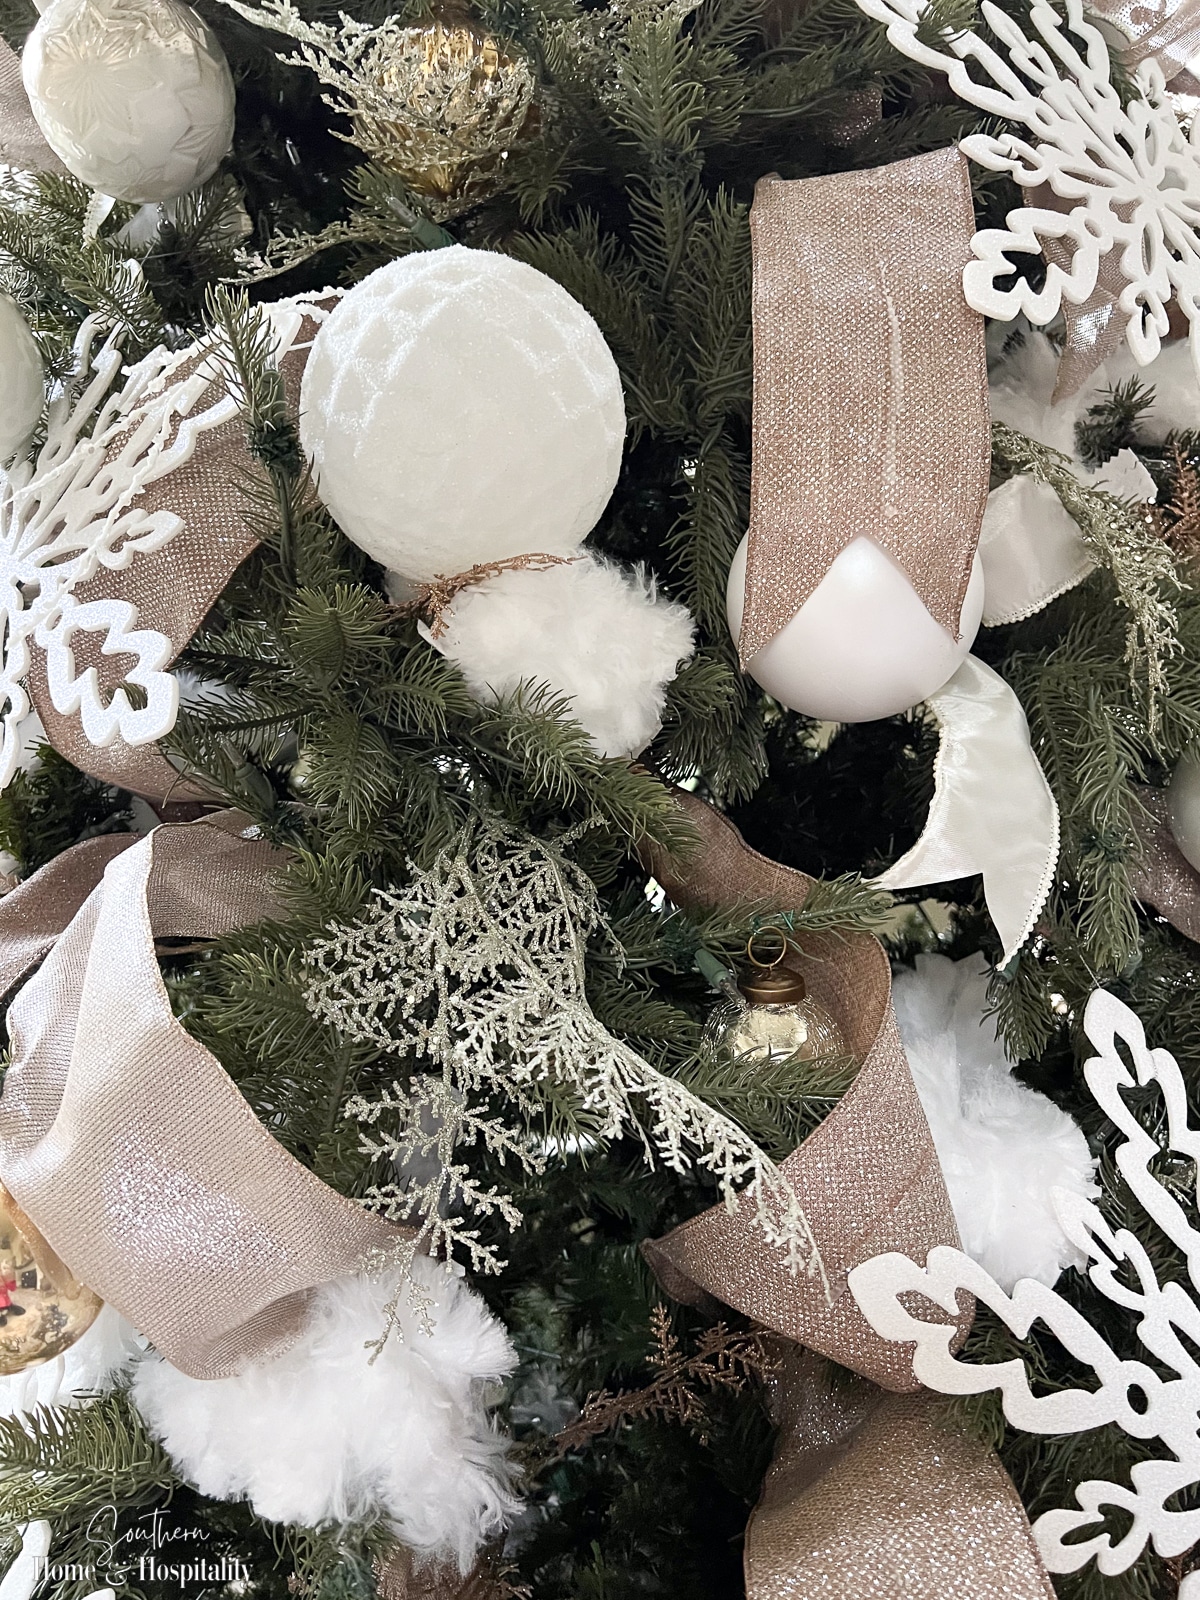 The Mess-Free Secret Hack for Adding Snow to Your Christmas Tree